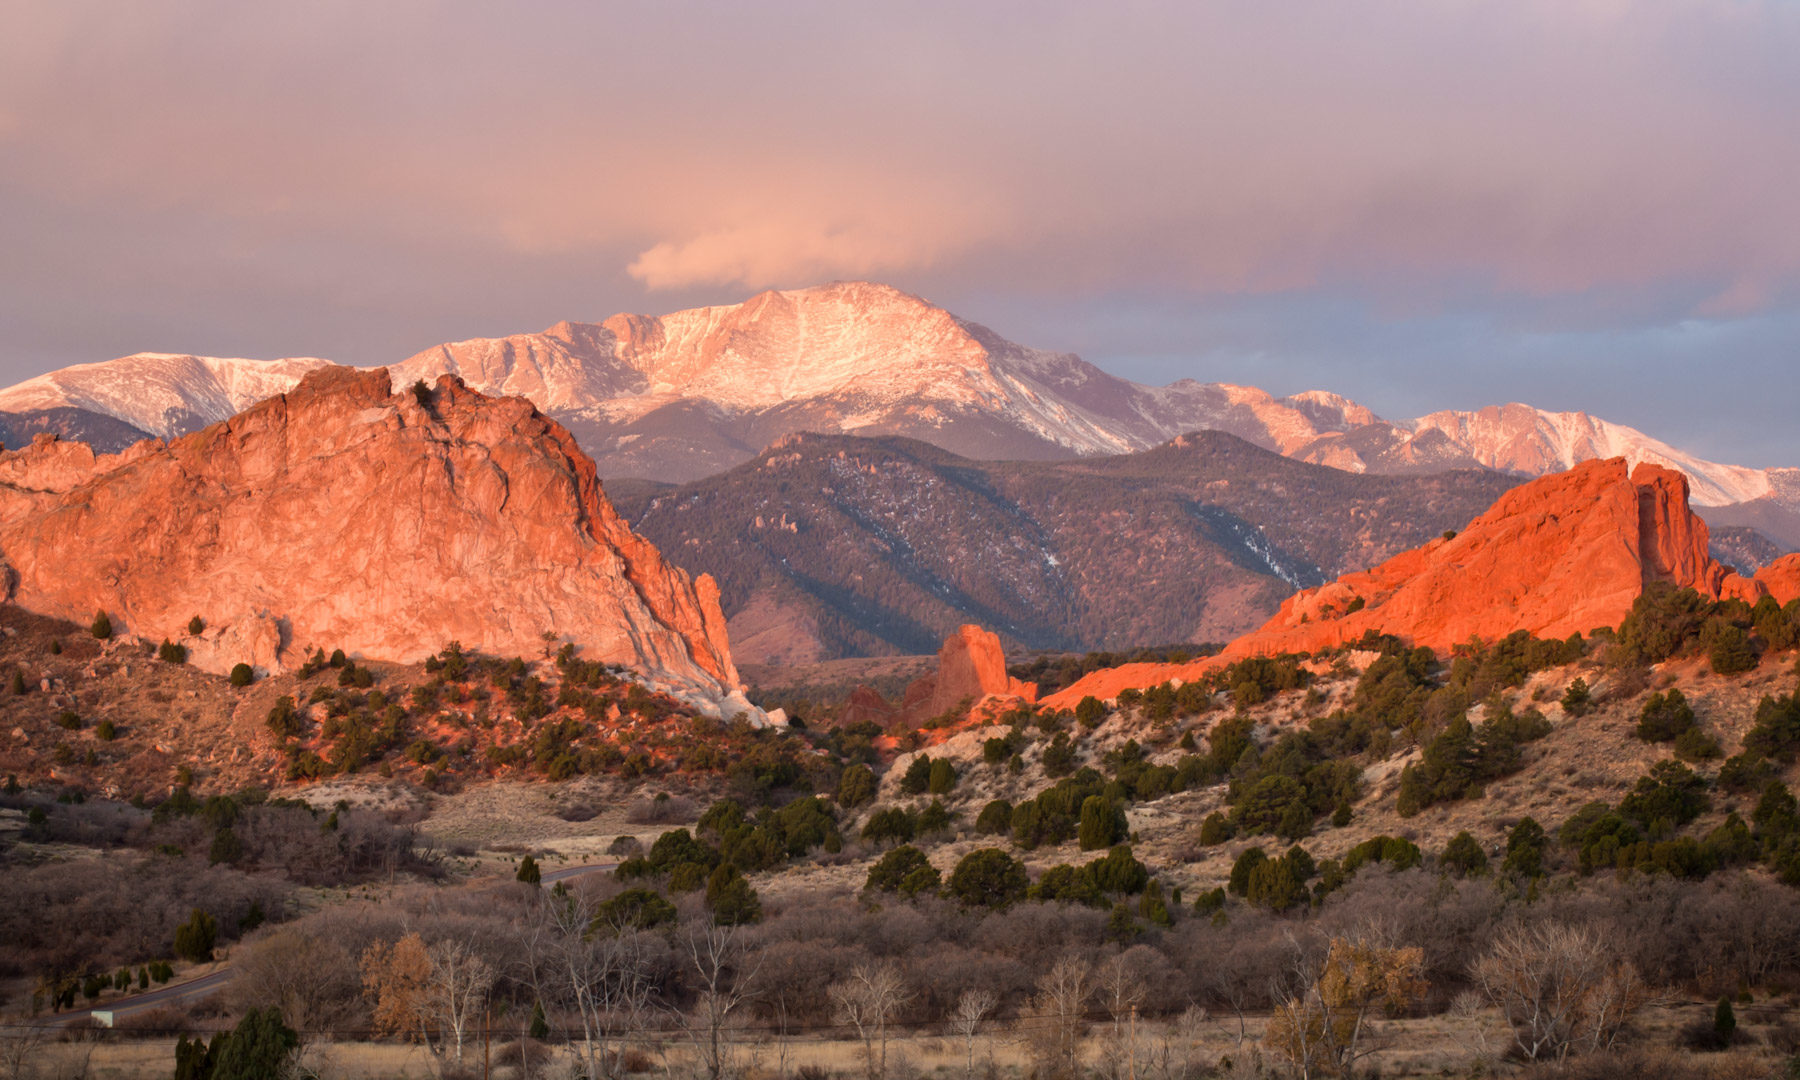 Airbnb Colorado Springs: Vacation Homes, Rentals, Cabins, & Tiny Houses